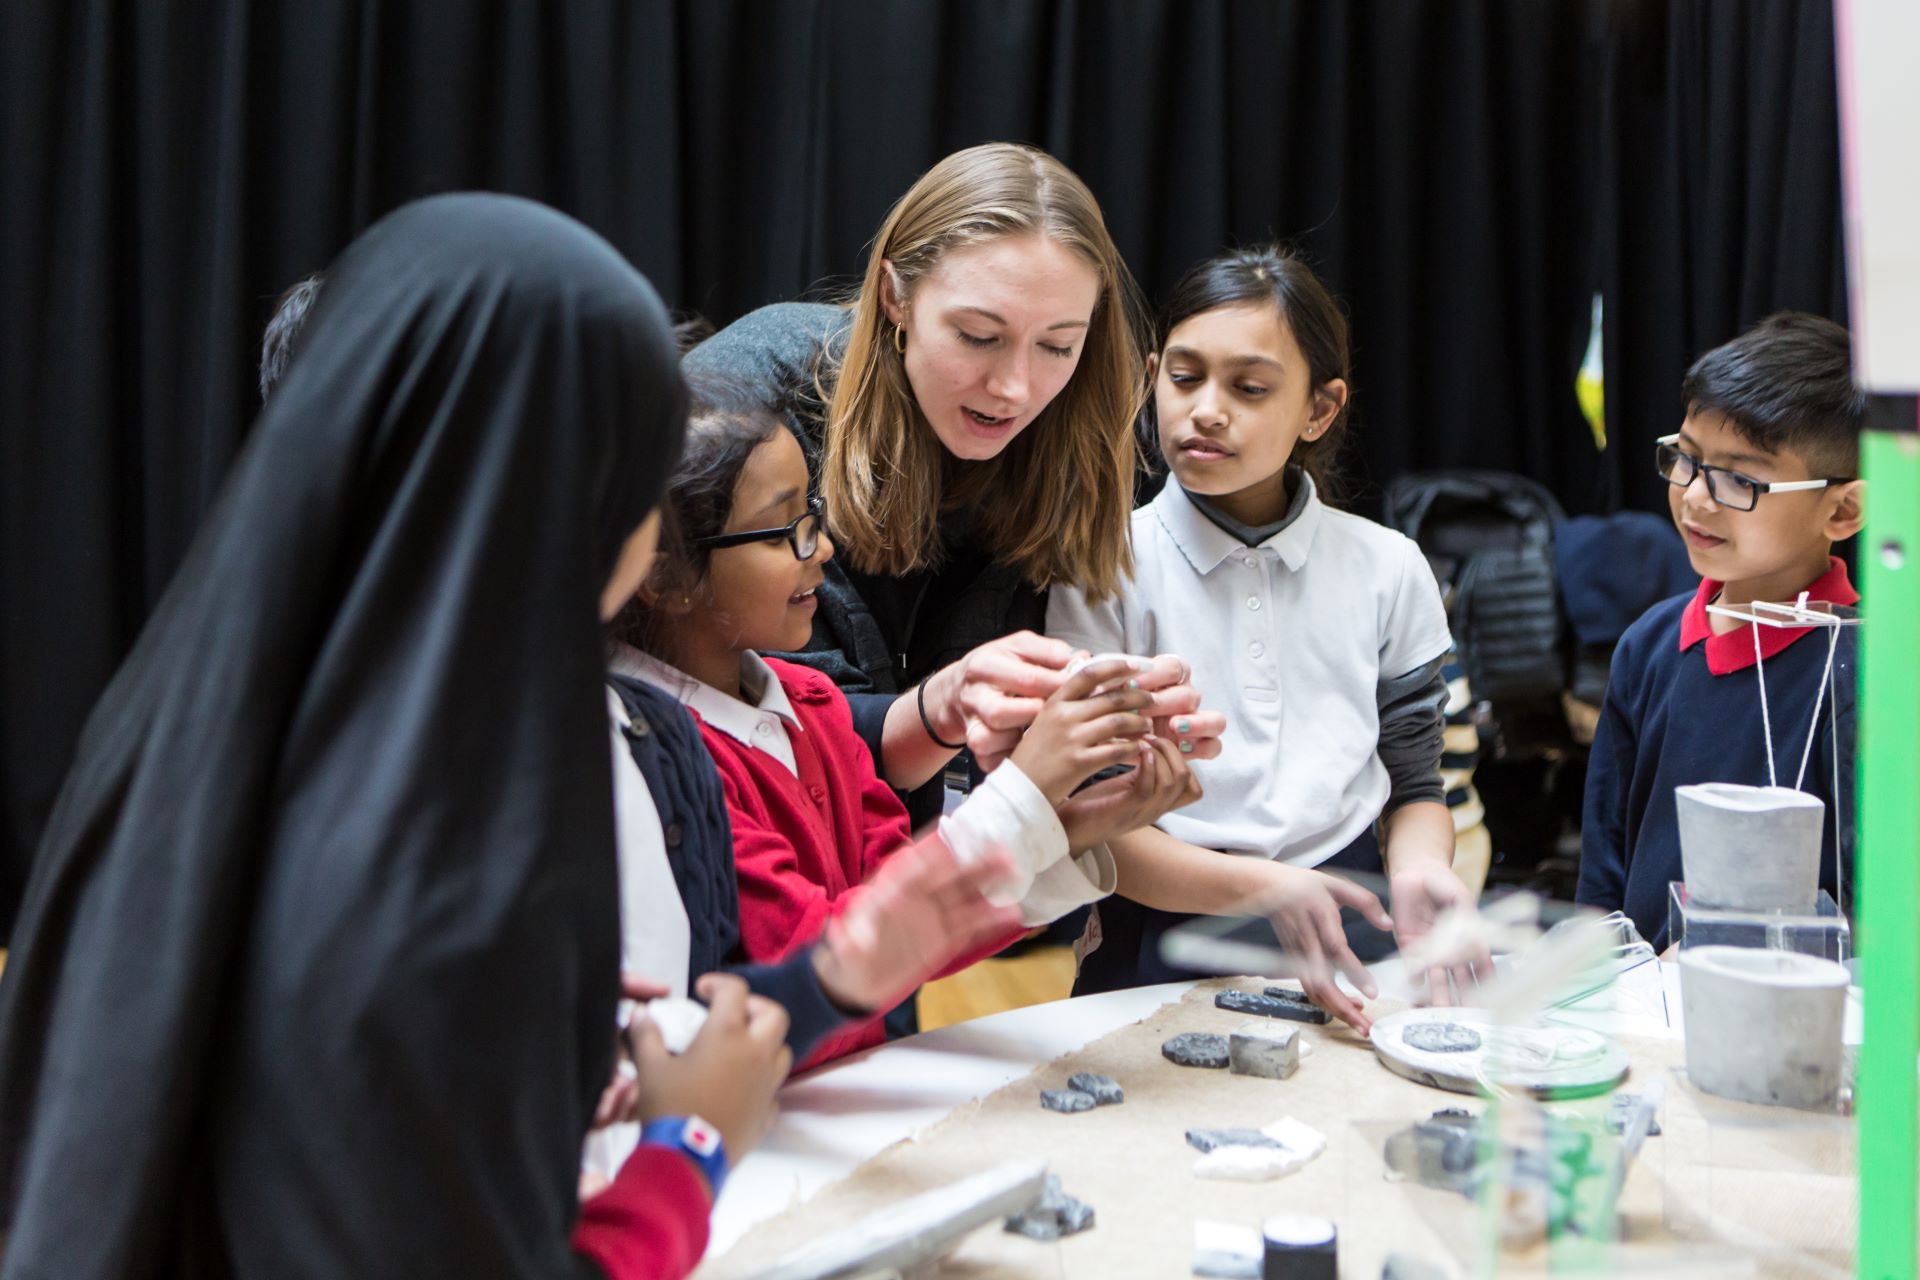 Pupils play with clay, helped by an artist educator.